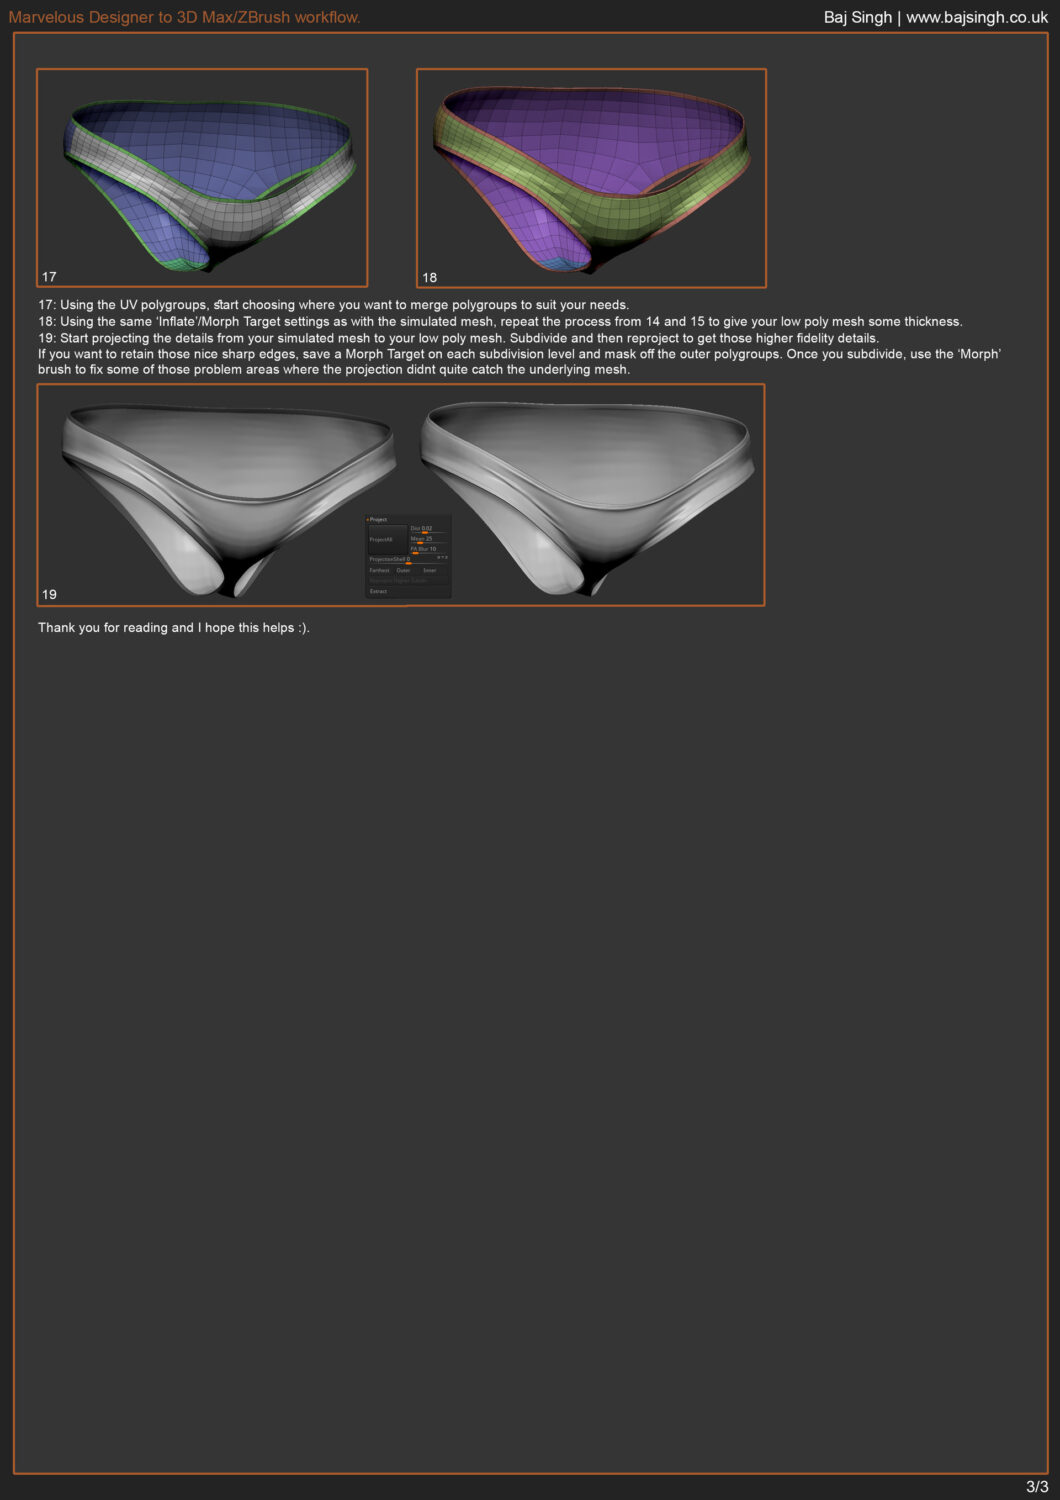 Marvelous Designer to 3D Max/ZBrush workflow _ By Baj Singh Marvelous Designer Marvelous Designer,3D Max